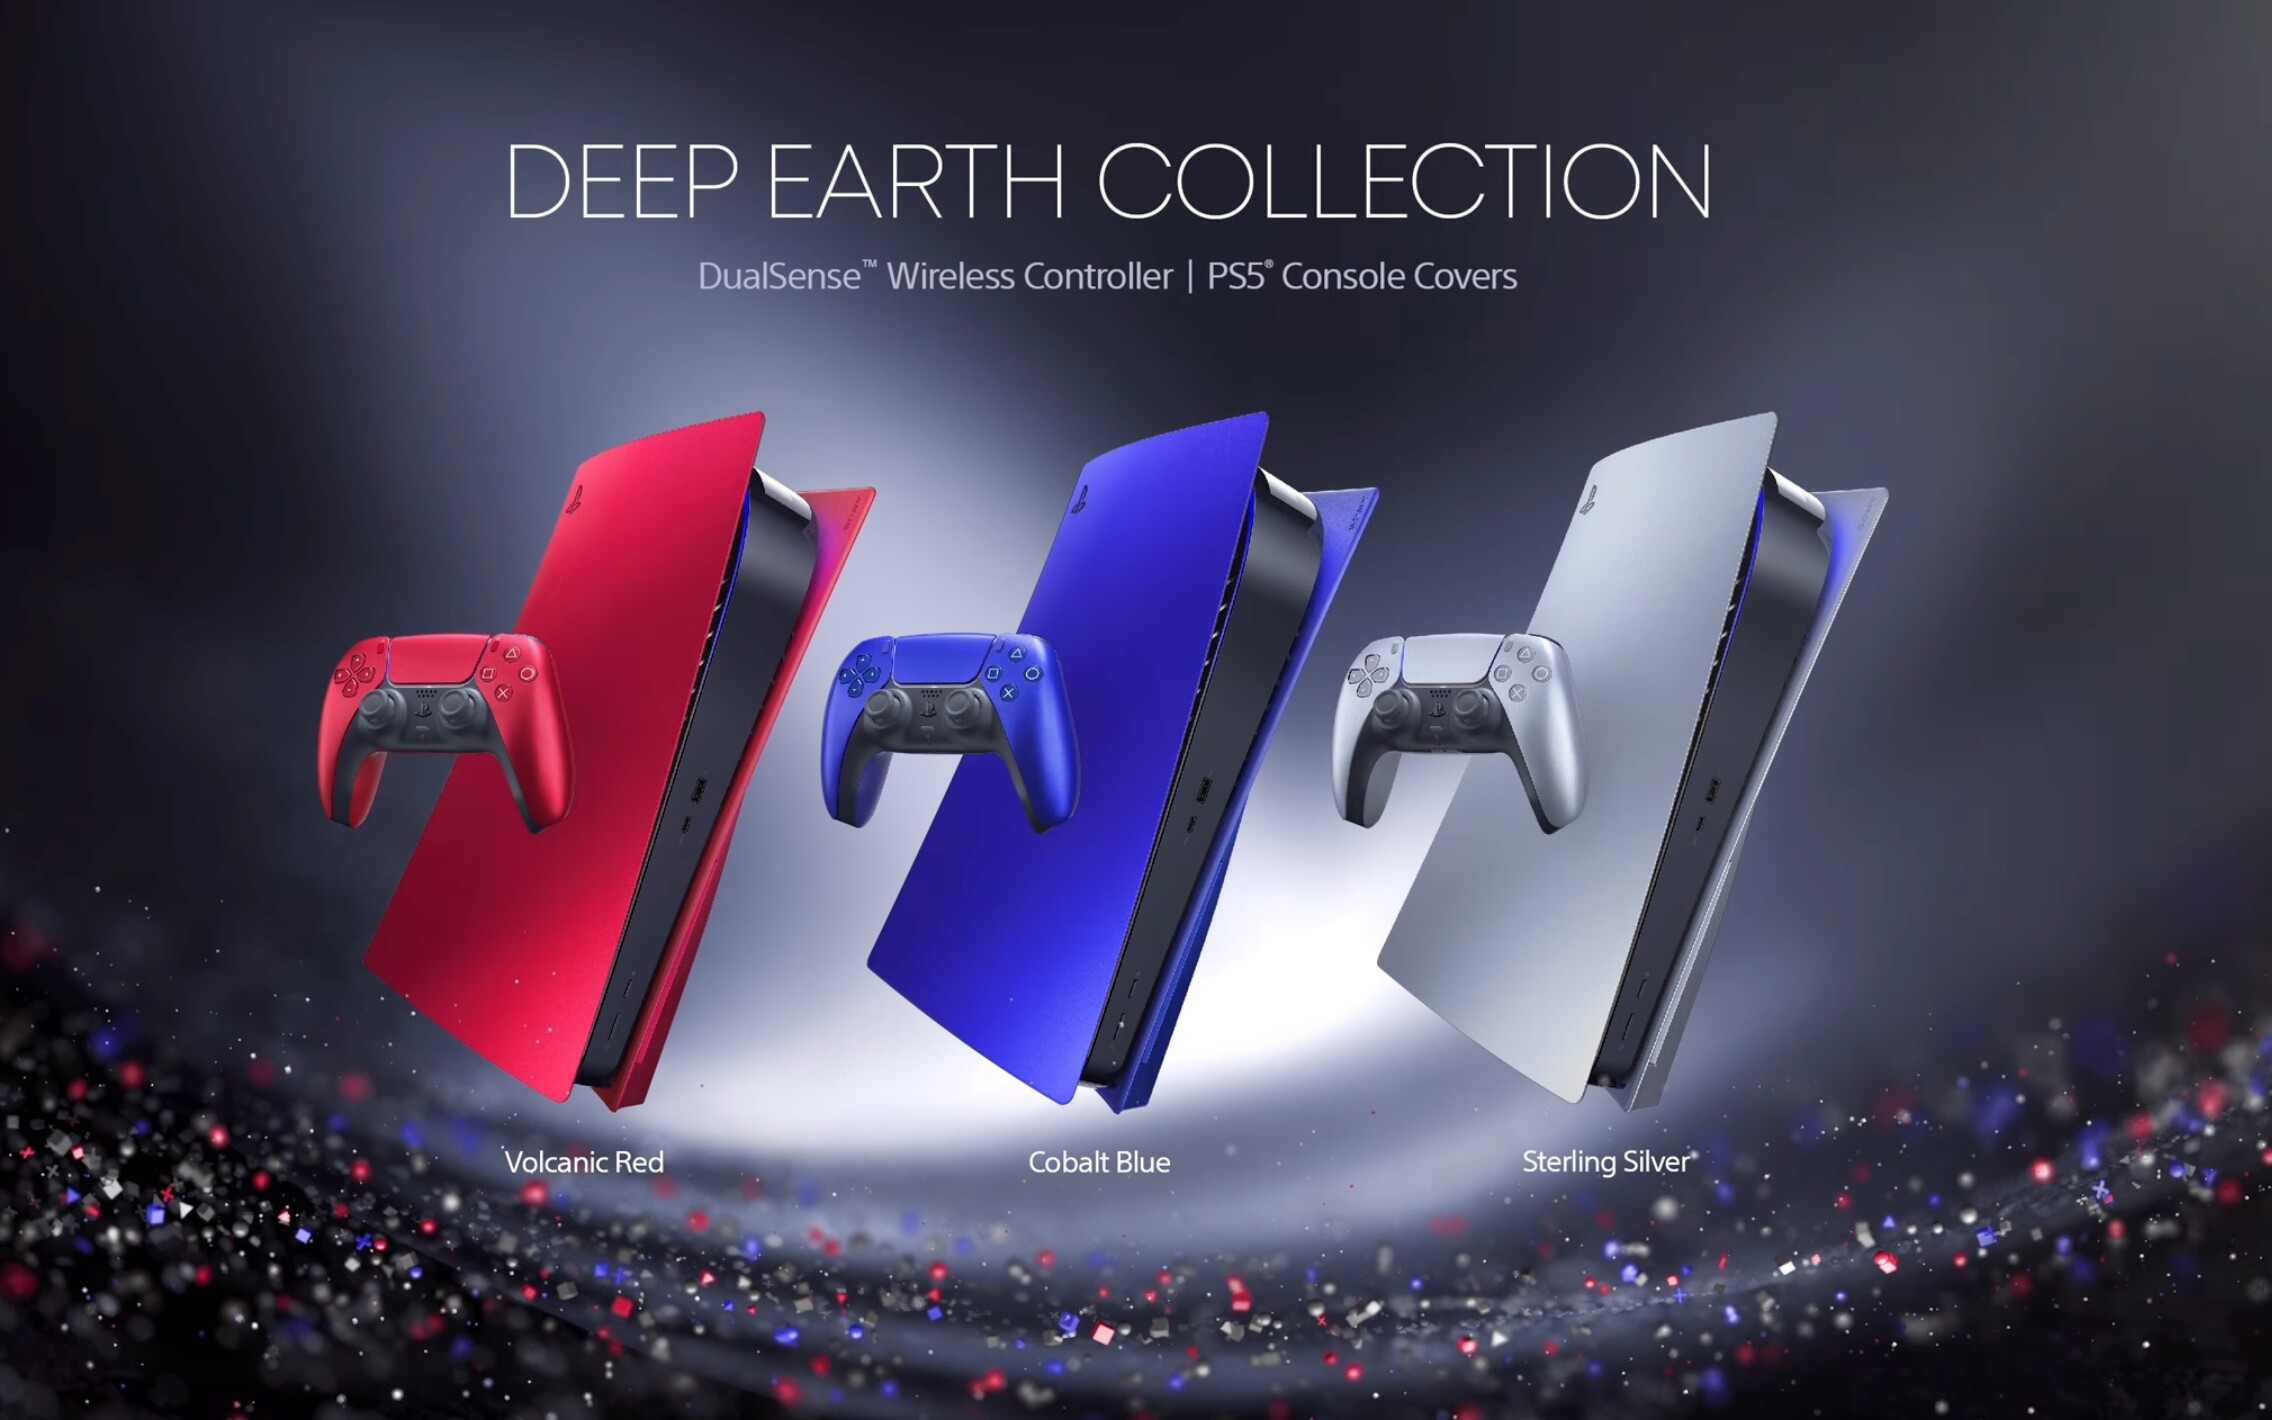 PS5 in new colors.  Sony presented the Inside the Earth collection